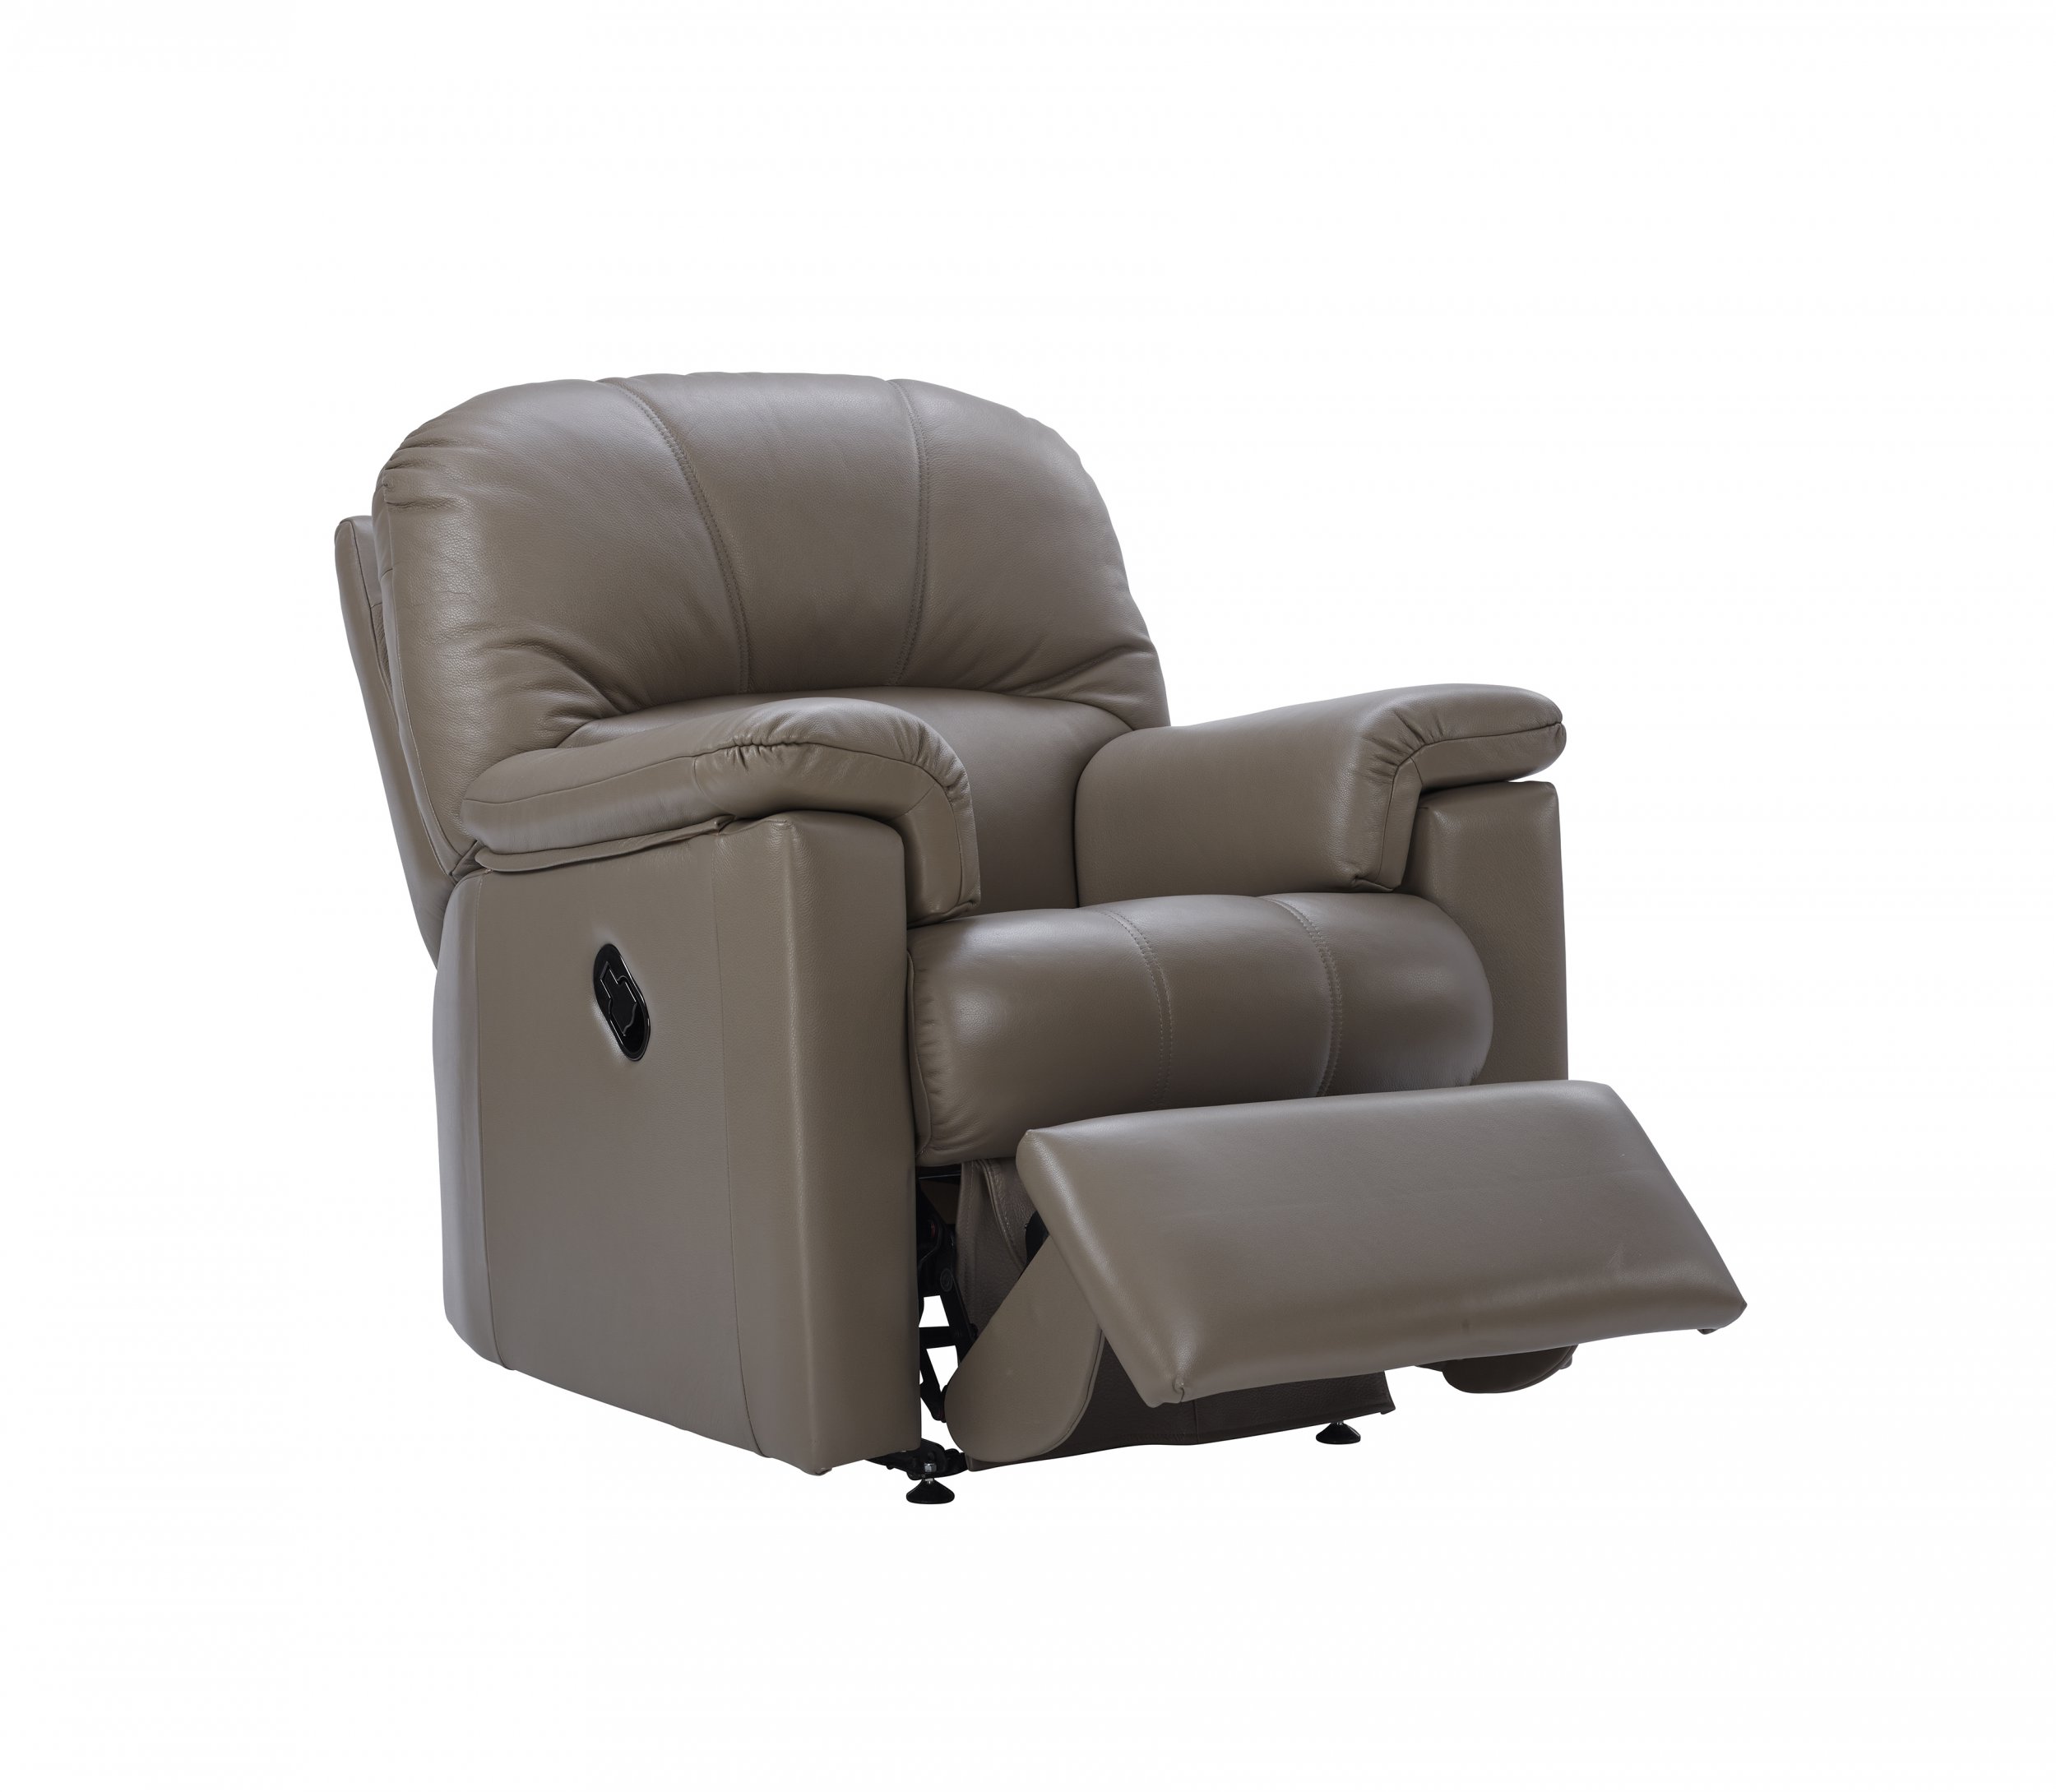 Chloe Small Manual Recliner Chair | Eyres Furniture